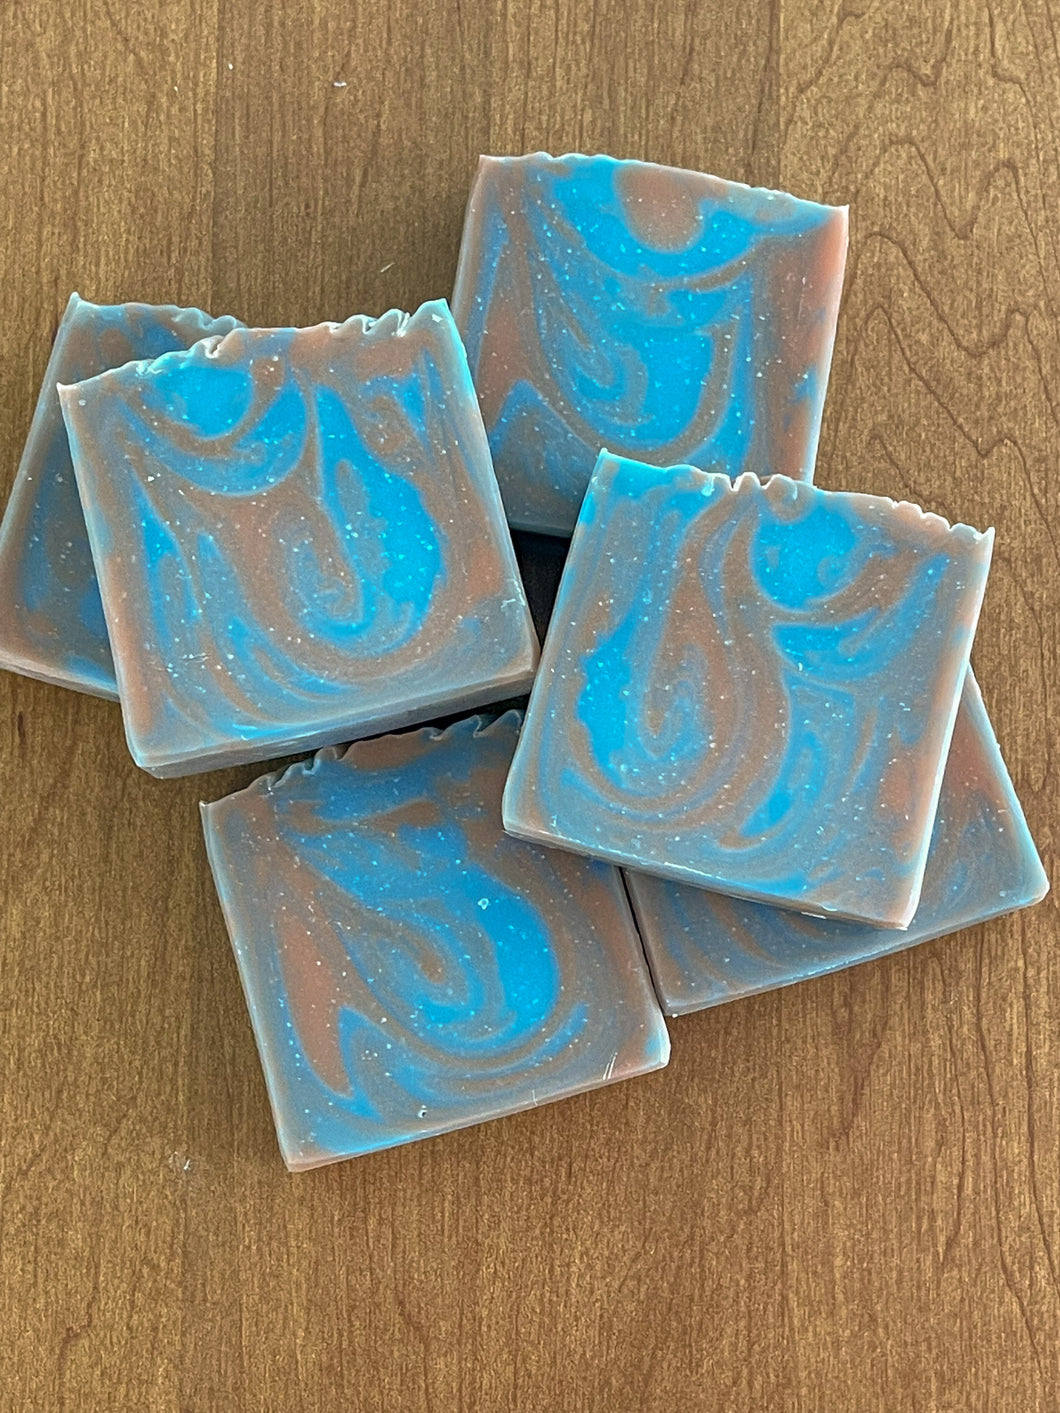 PALO BAY HANDCRAFTED MEN'S SOAP